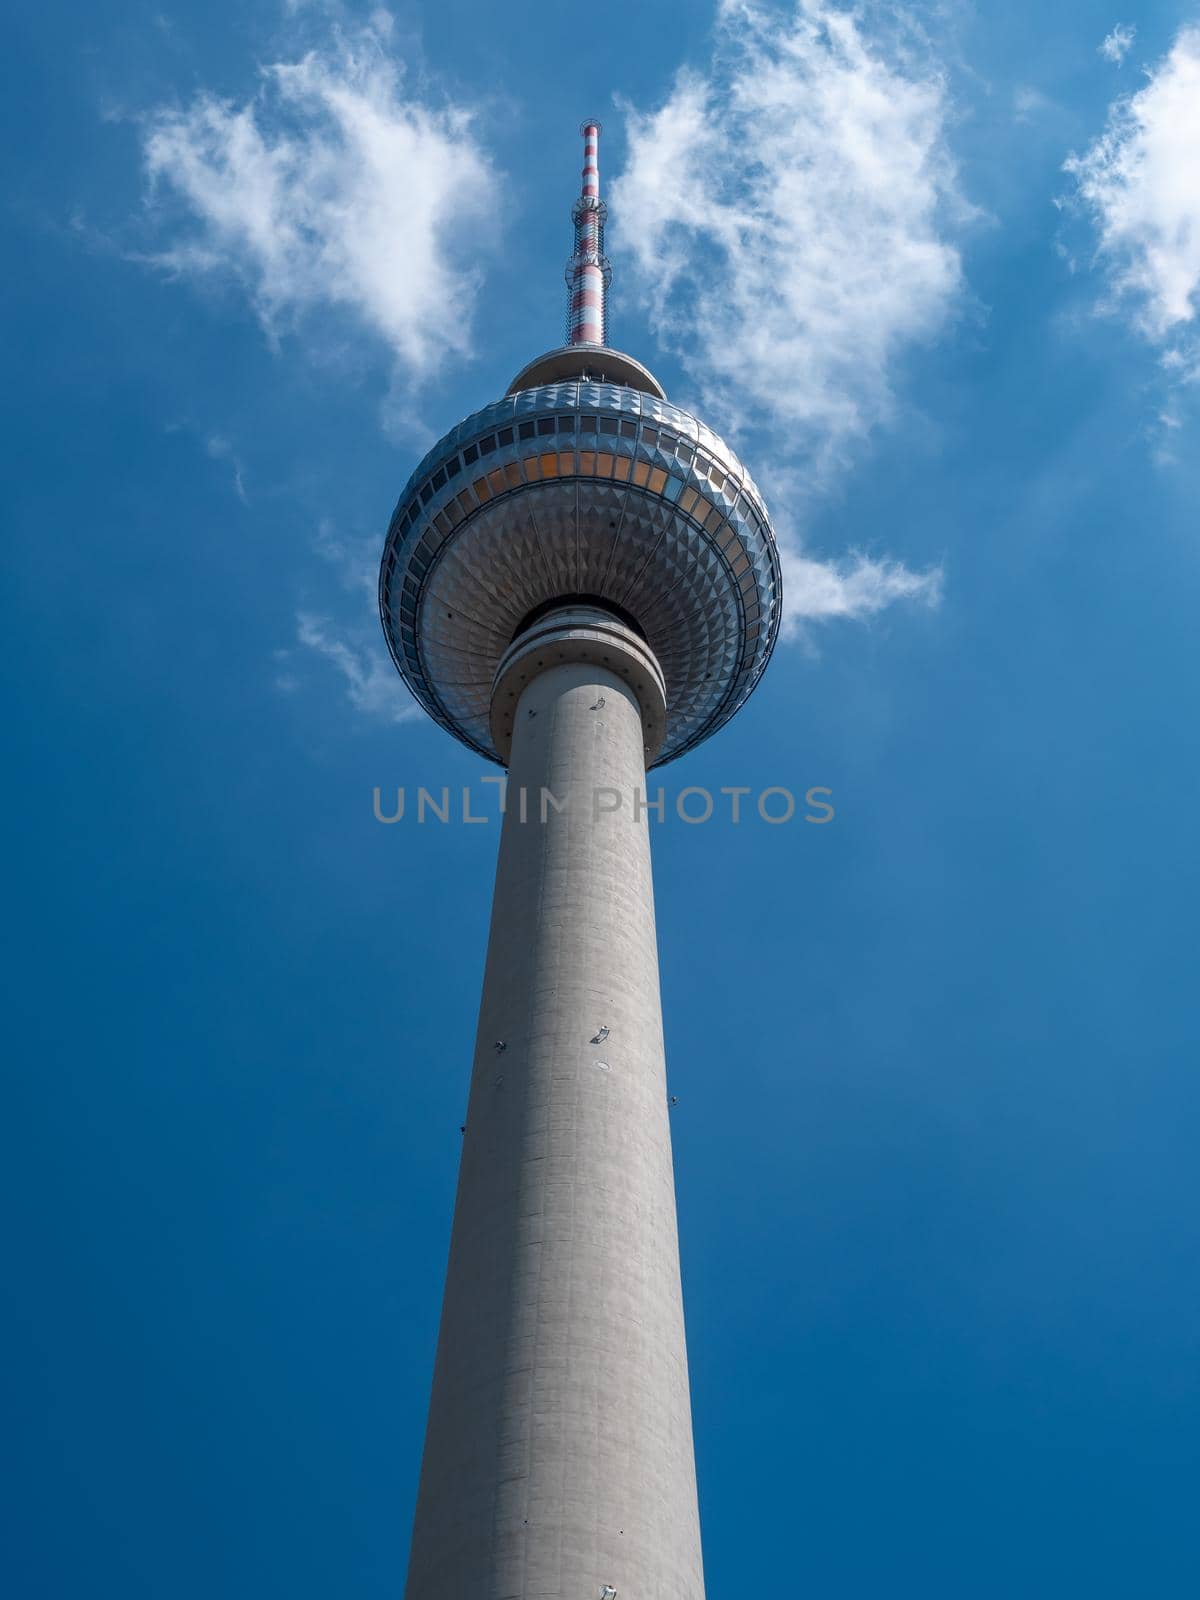 Berlin Television Tower from low angle during summer, germany by bildgigant